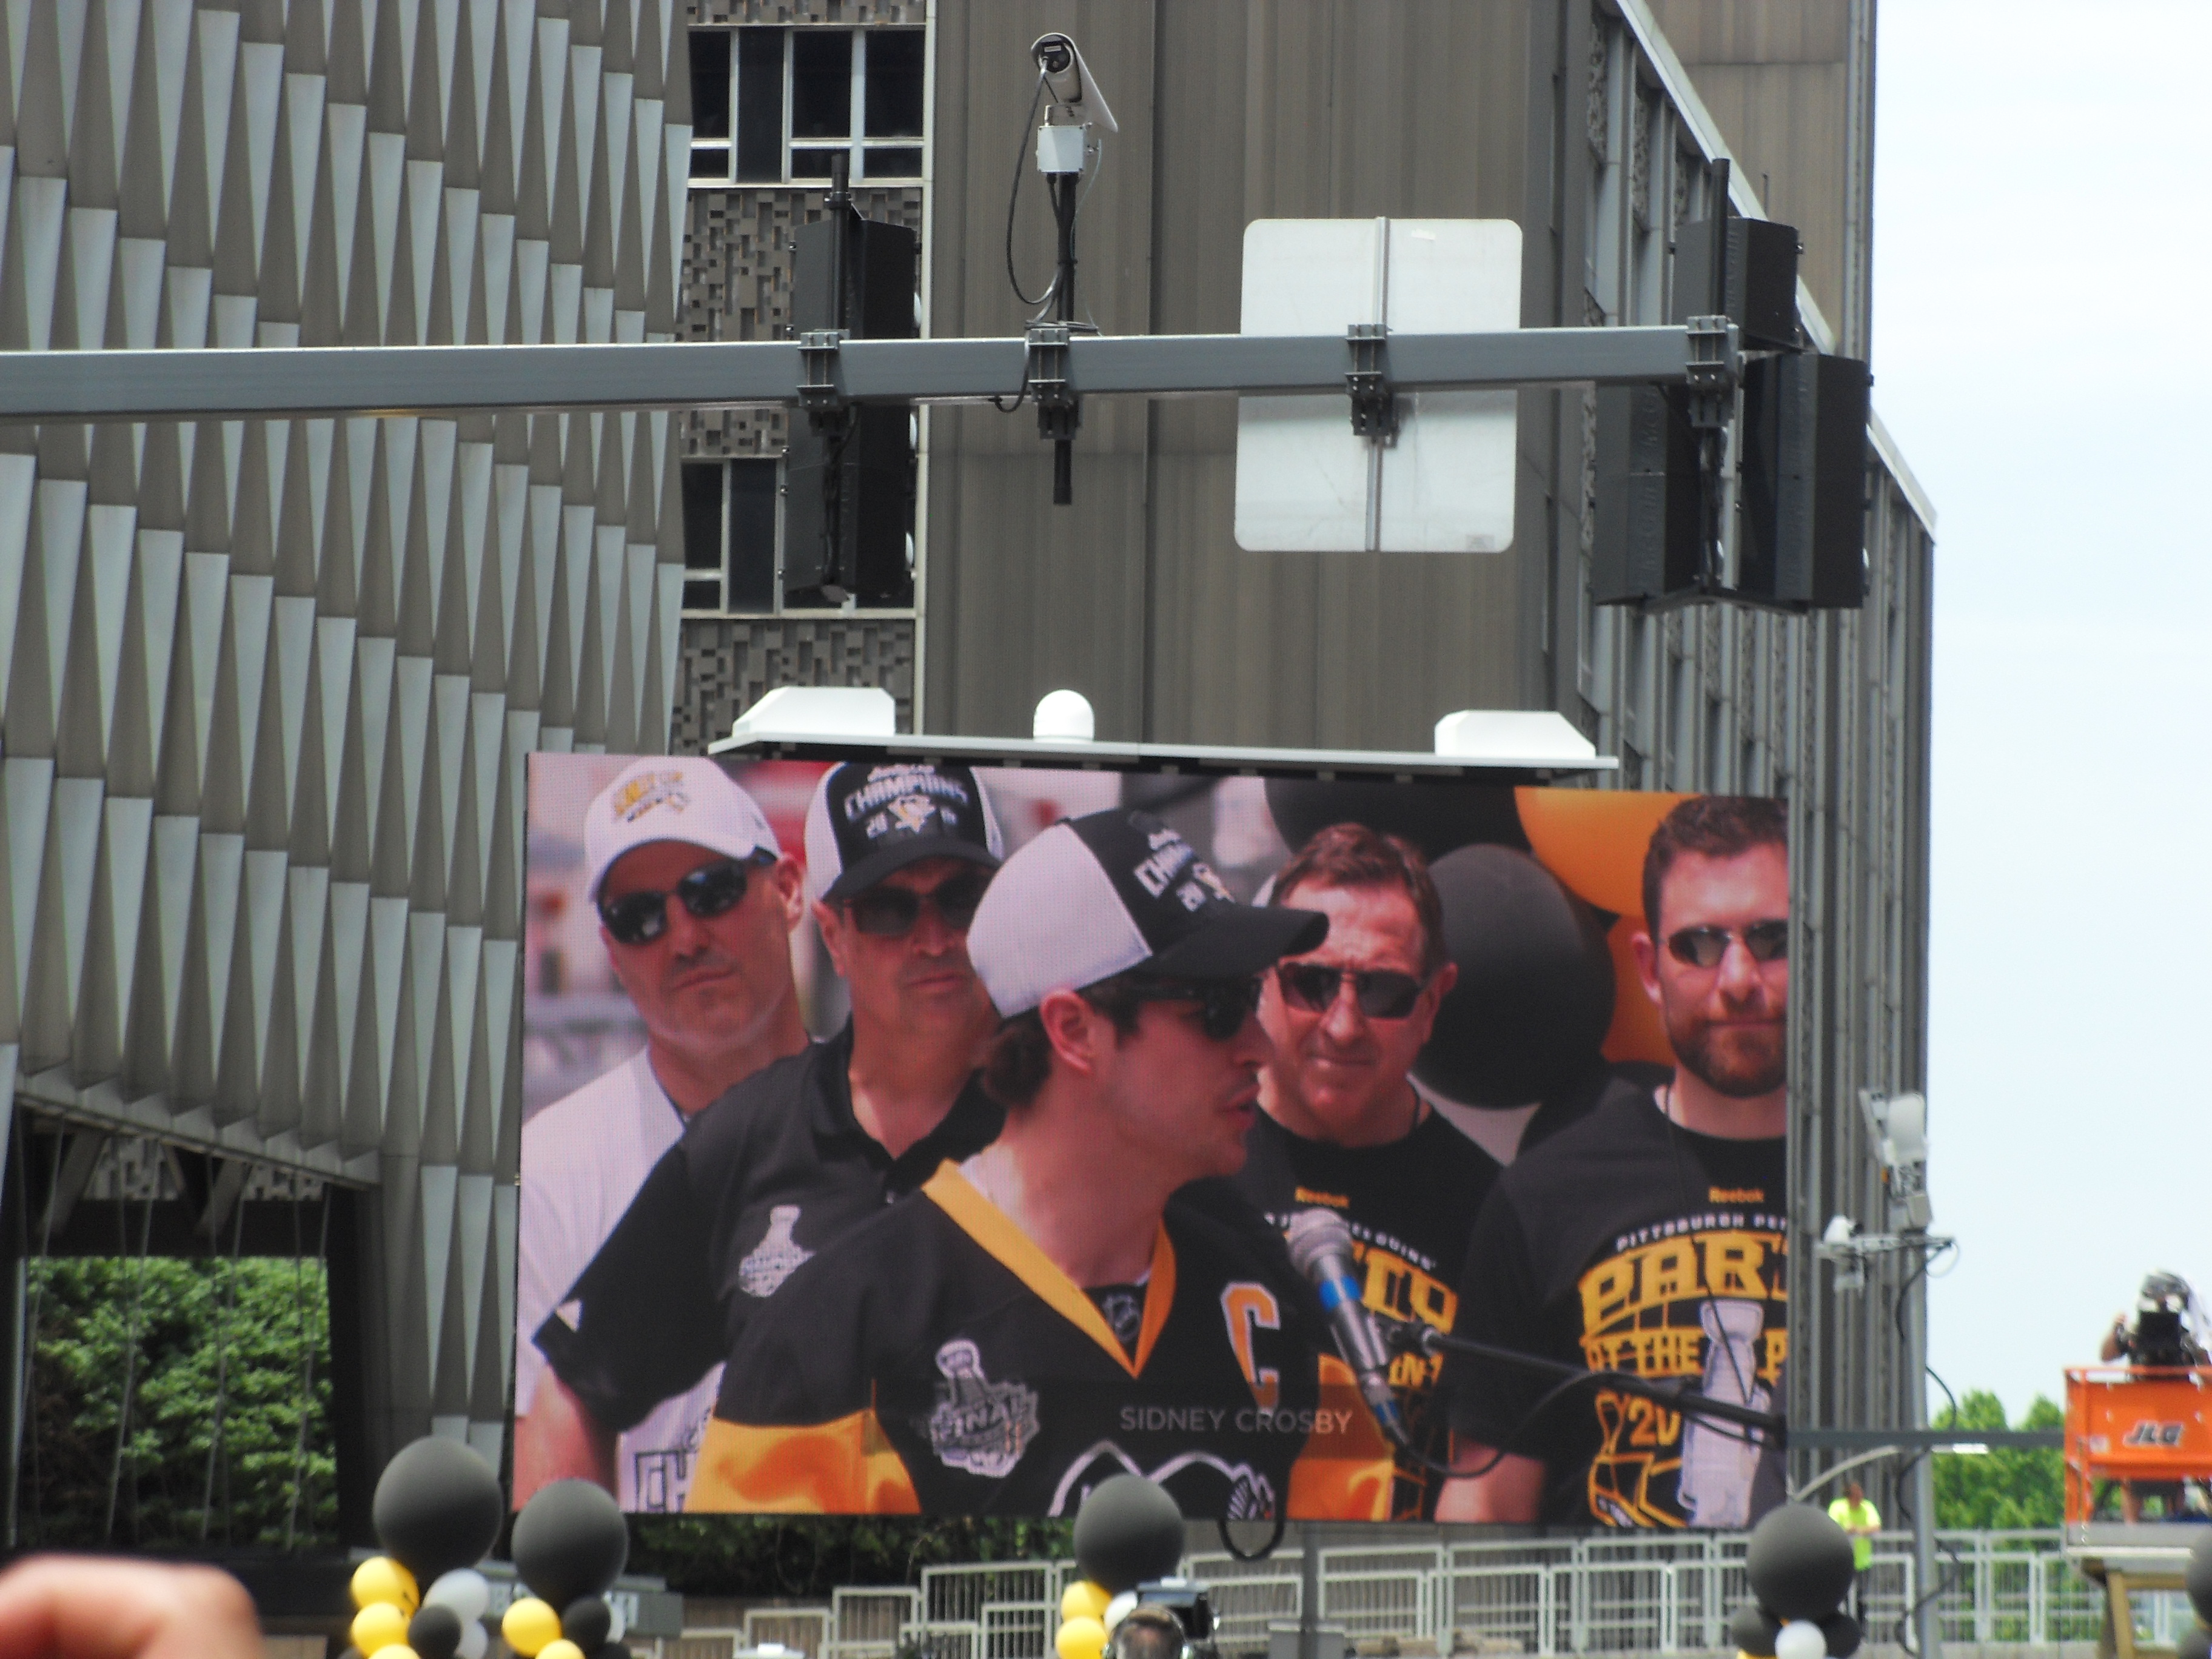 Crosby on the screen